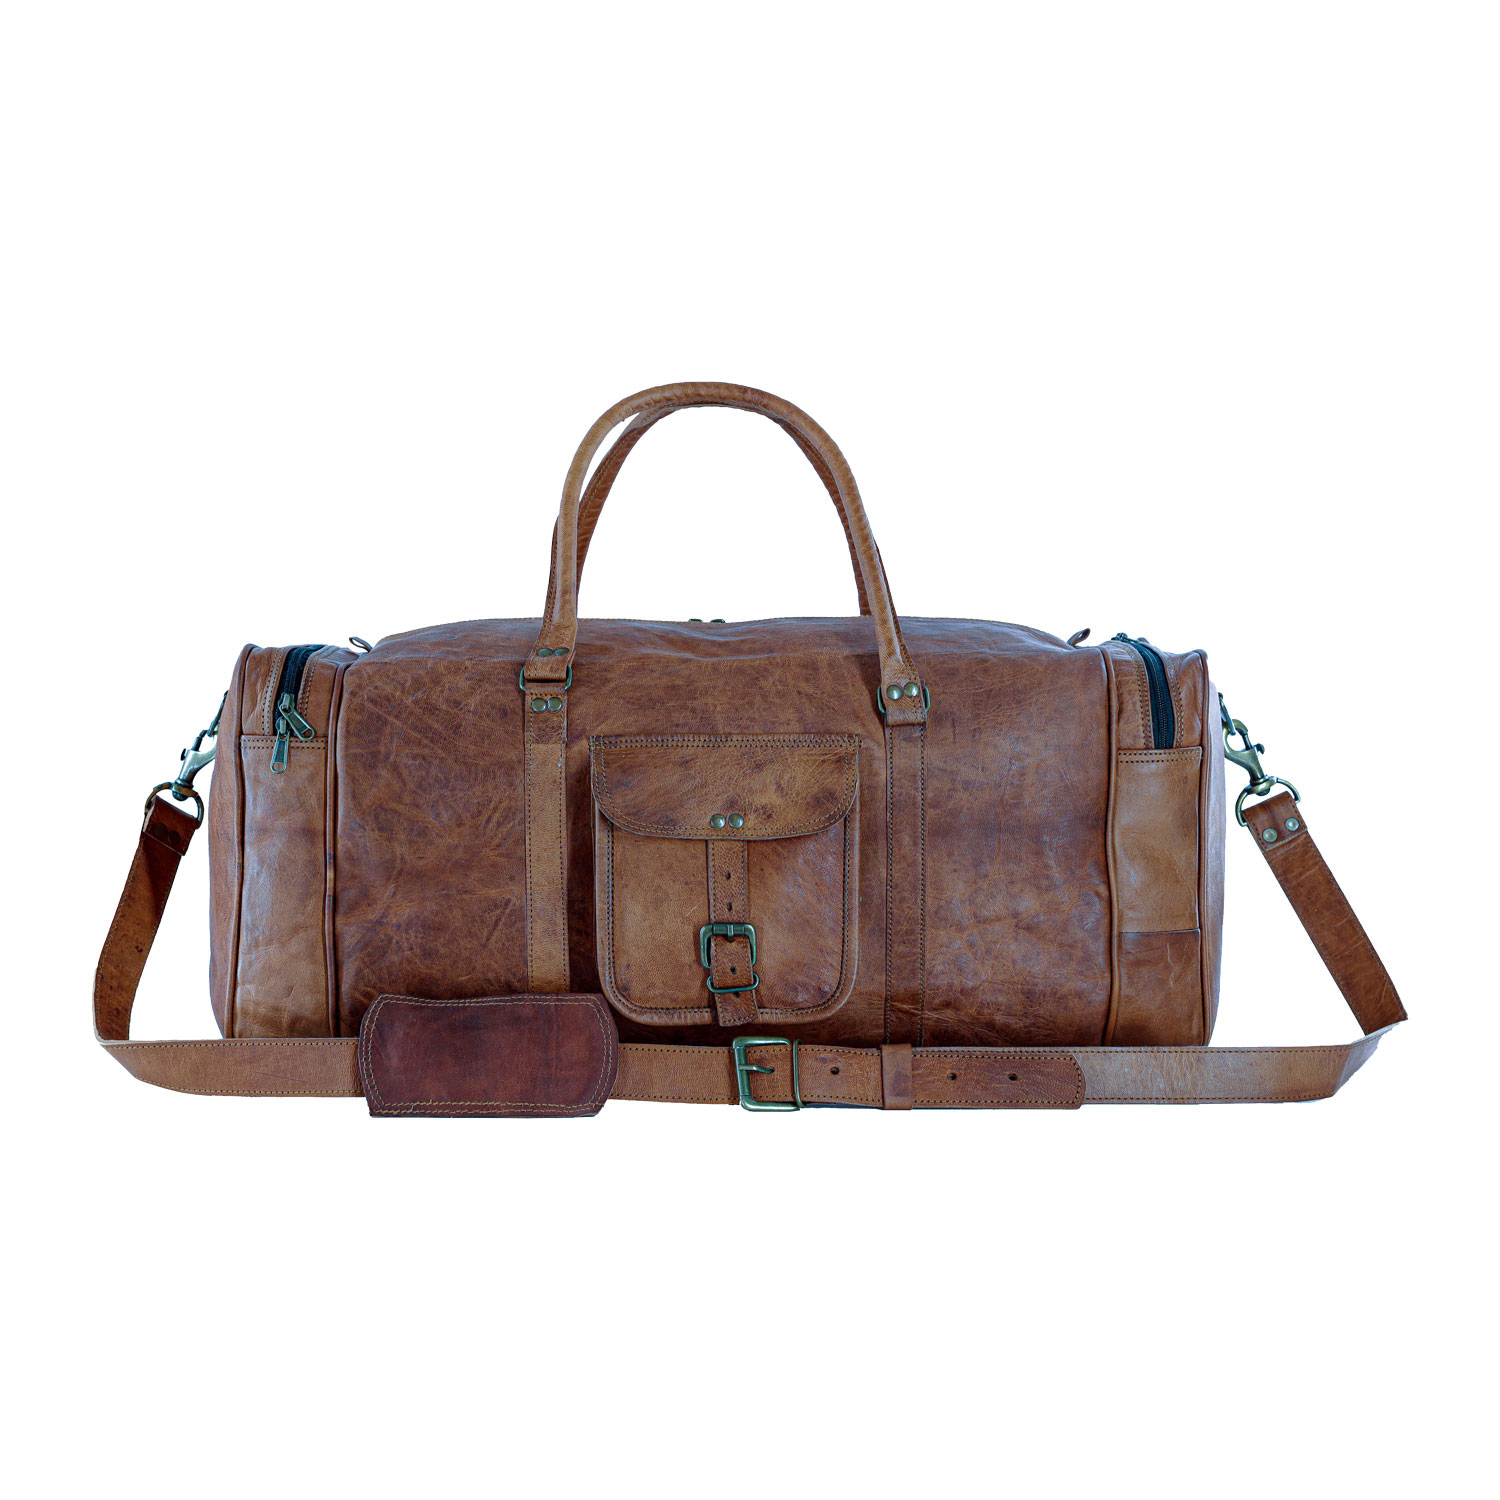 KPL 21 Inch Vintage Leather Duffel Travel Gym Sports Overnight Weekend Duffle Bags for men and women - image 4 of 9